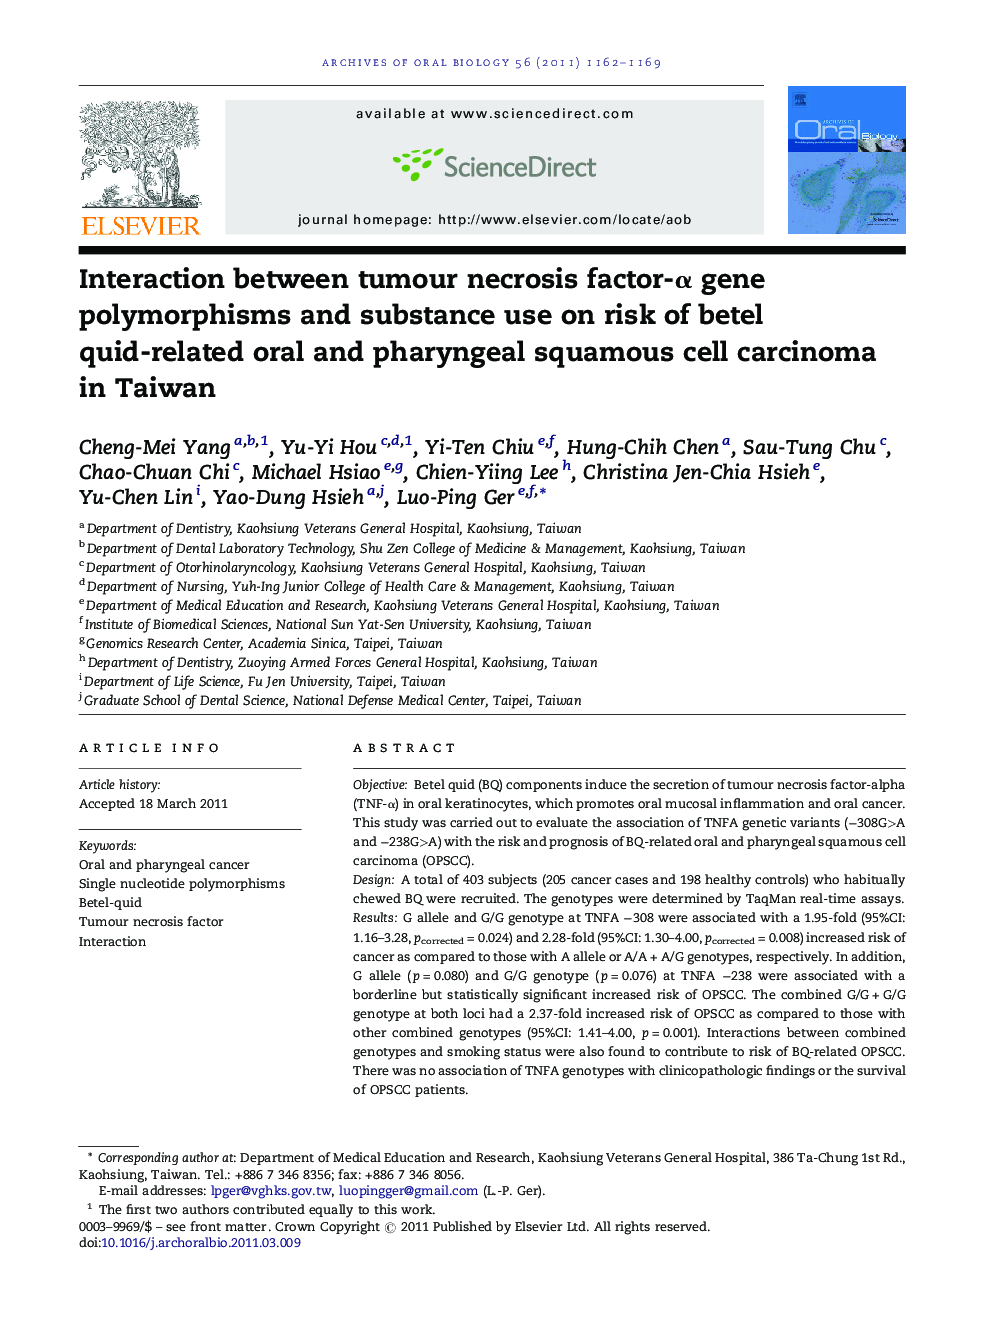 Interaction between tumour necrosis factor-Î± gene polymorphisms and substance use on risk of betel quid-related oral and pharyngeal squamous cell carcinoma in Taiwan